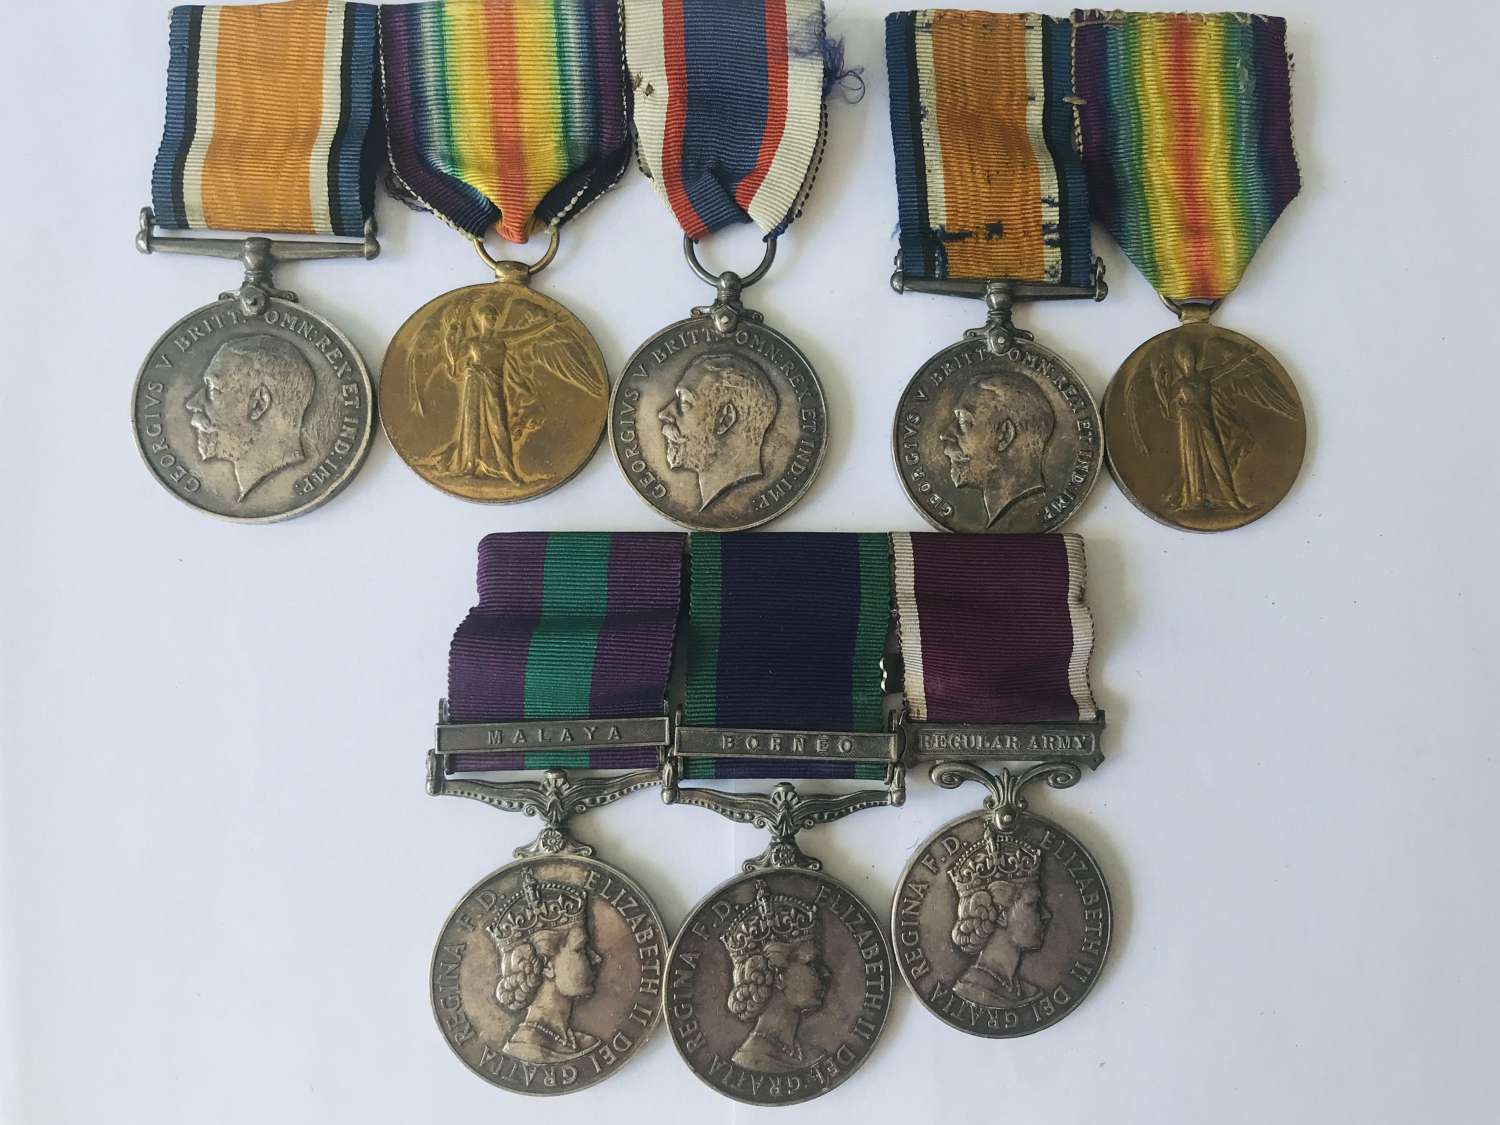 A group of medals to 3 members of the same family